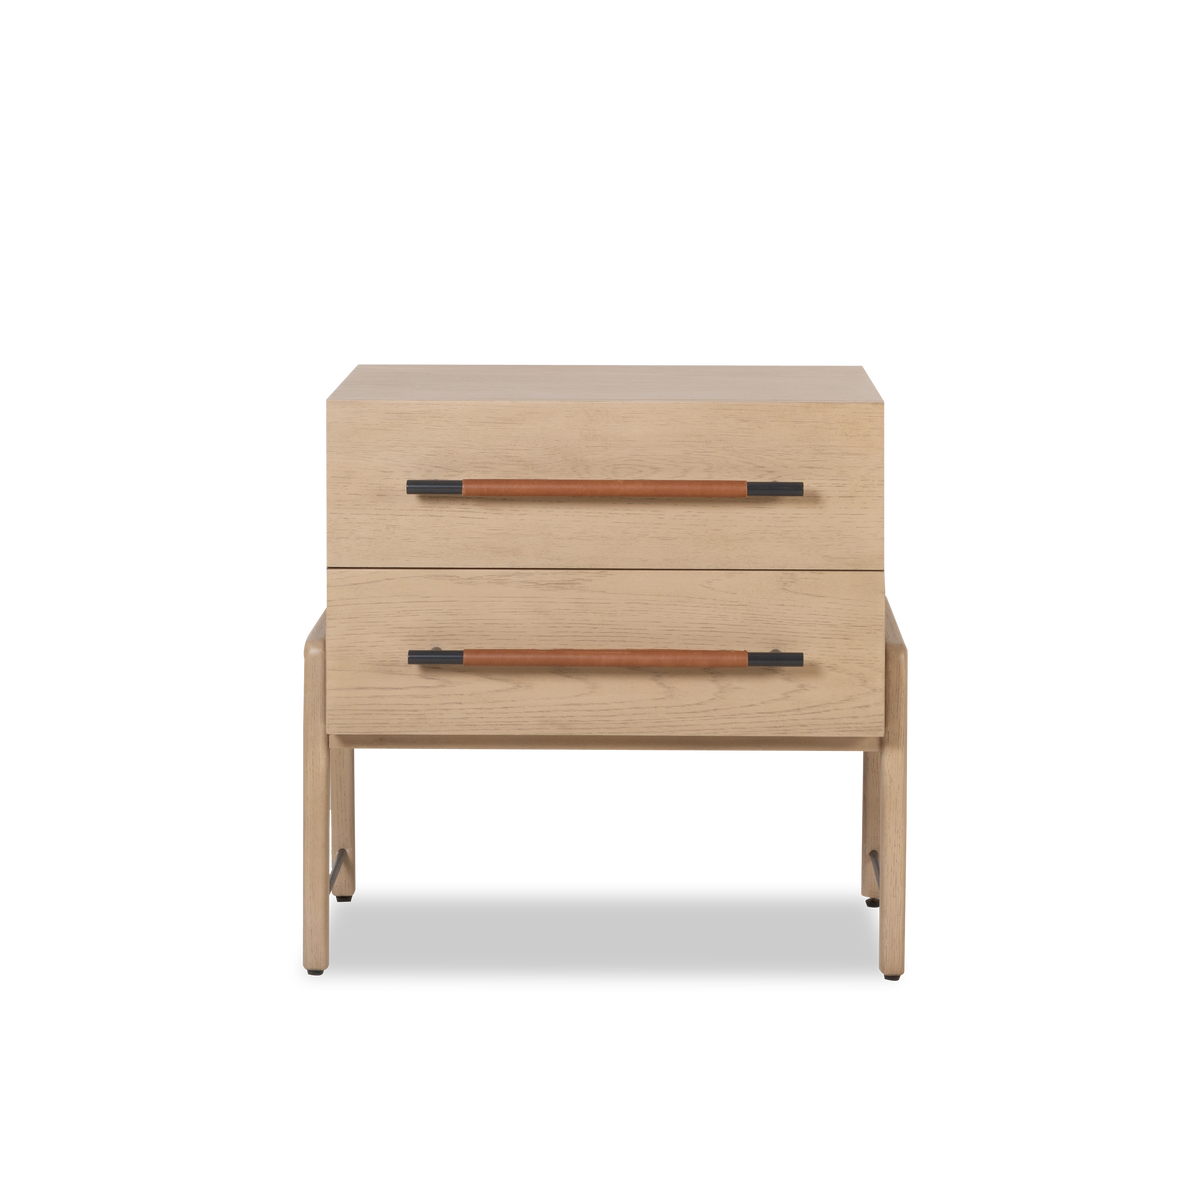 Crafted in a light-finished oak, the Buckley Nightstand boasts a clean mid-century modern inspired silhouette.